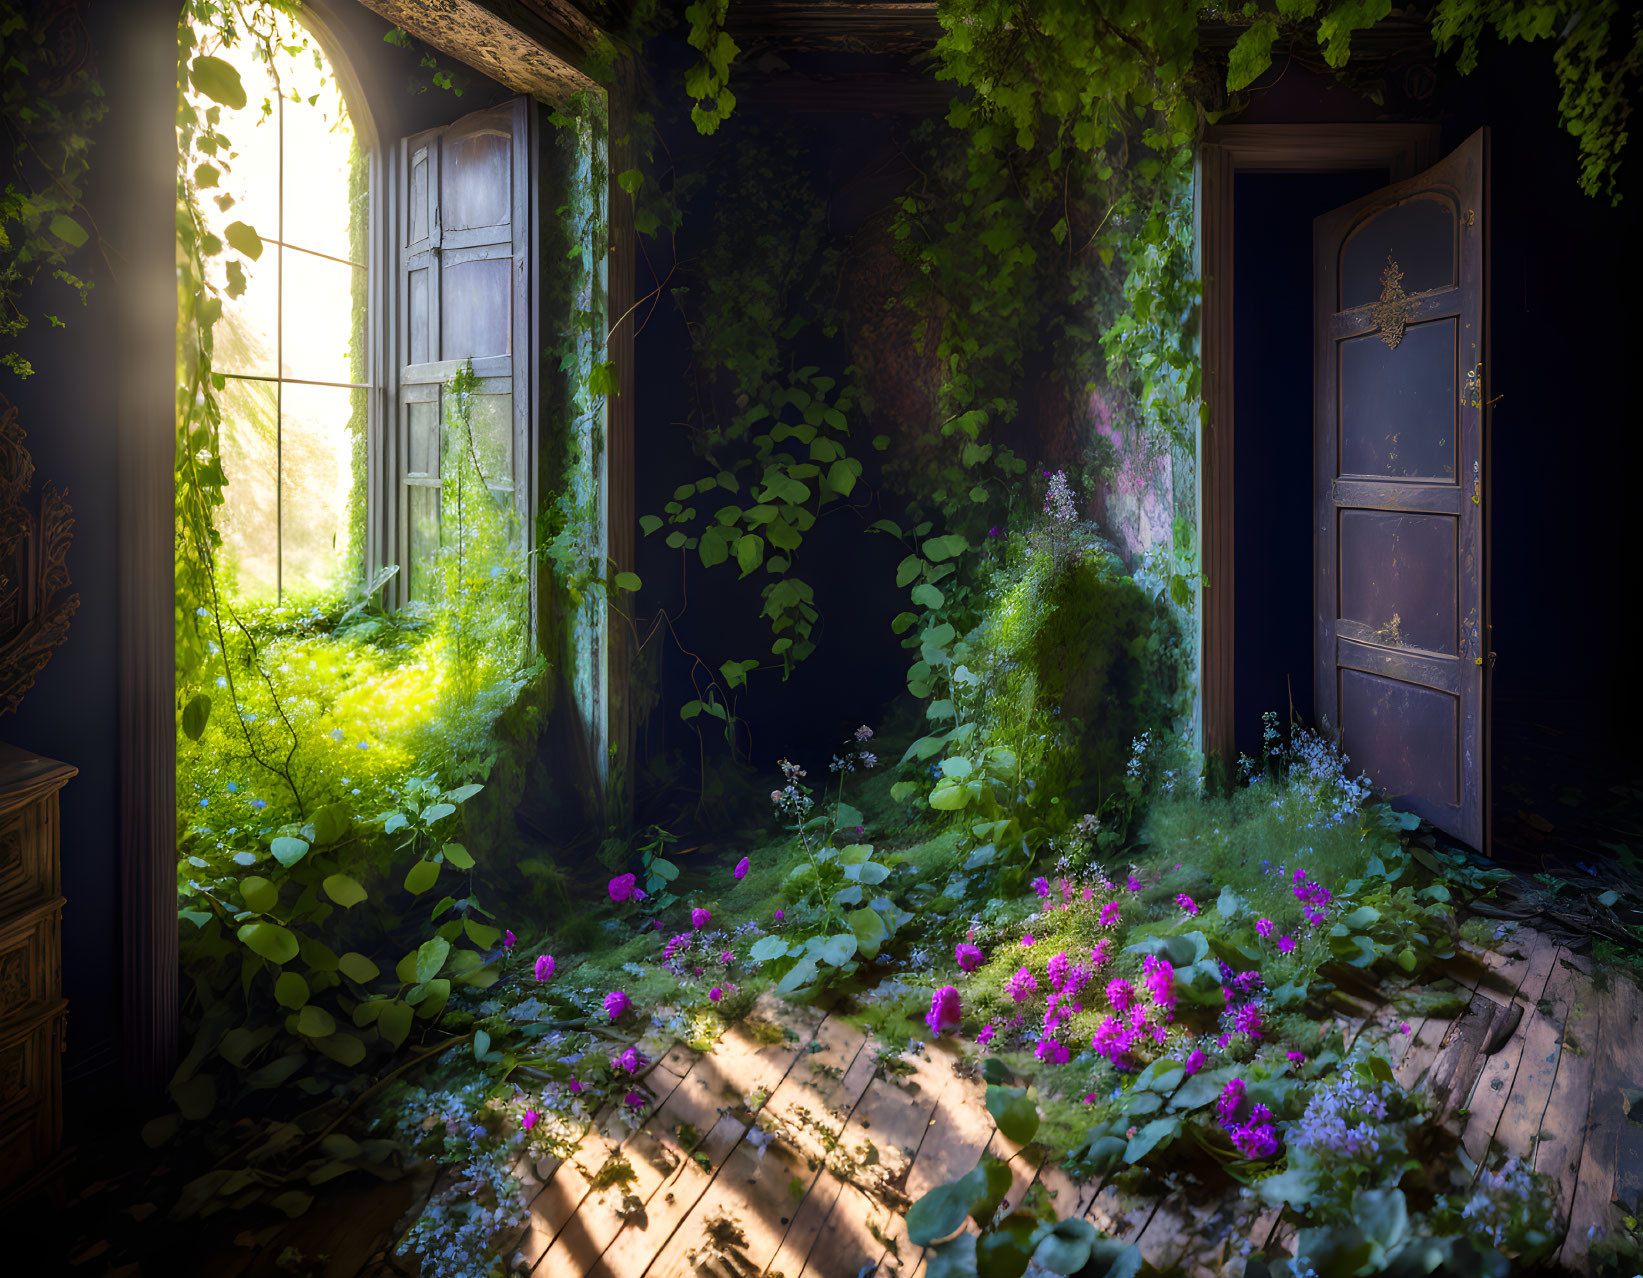 Abandoned room with foliage and purple flowers under sunlight